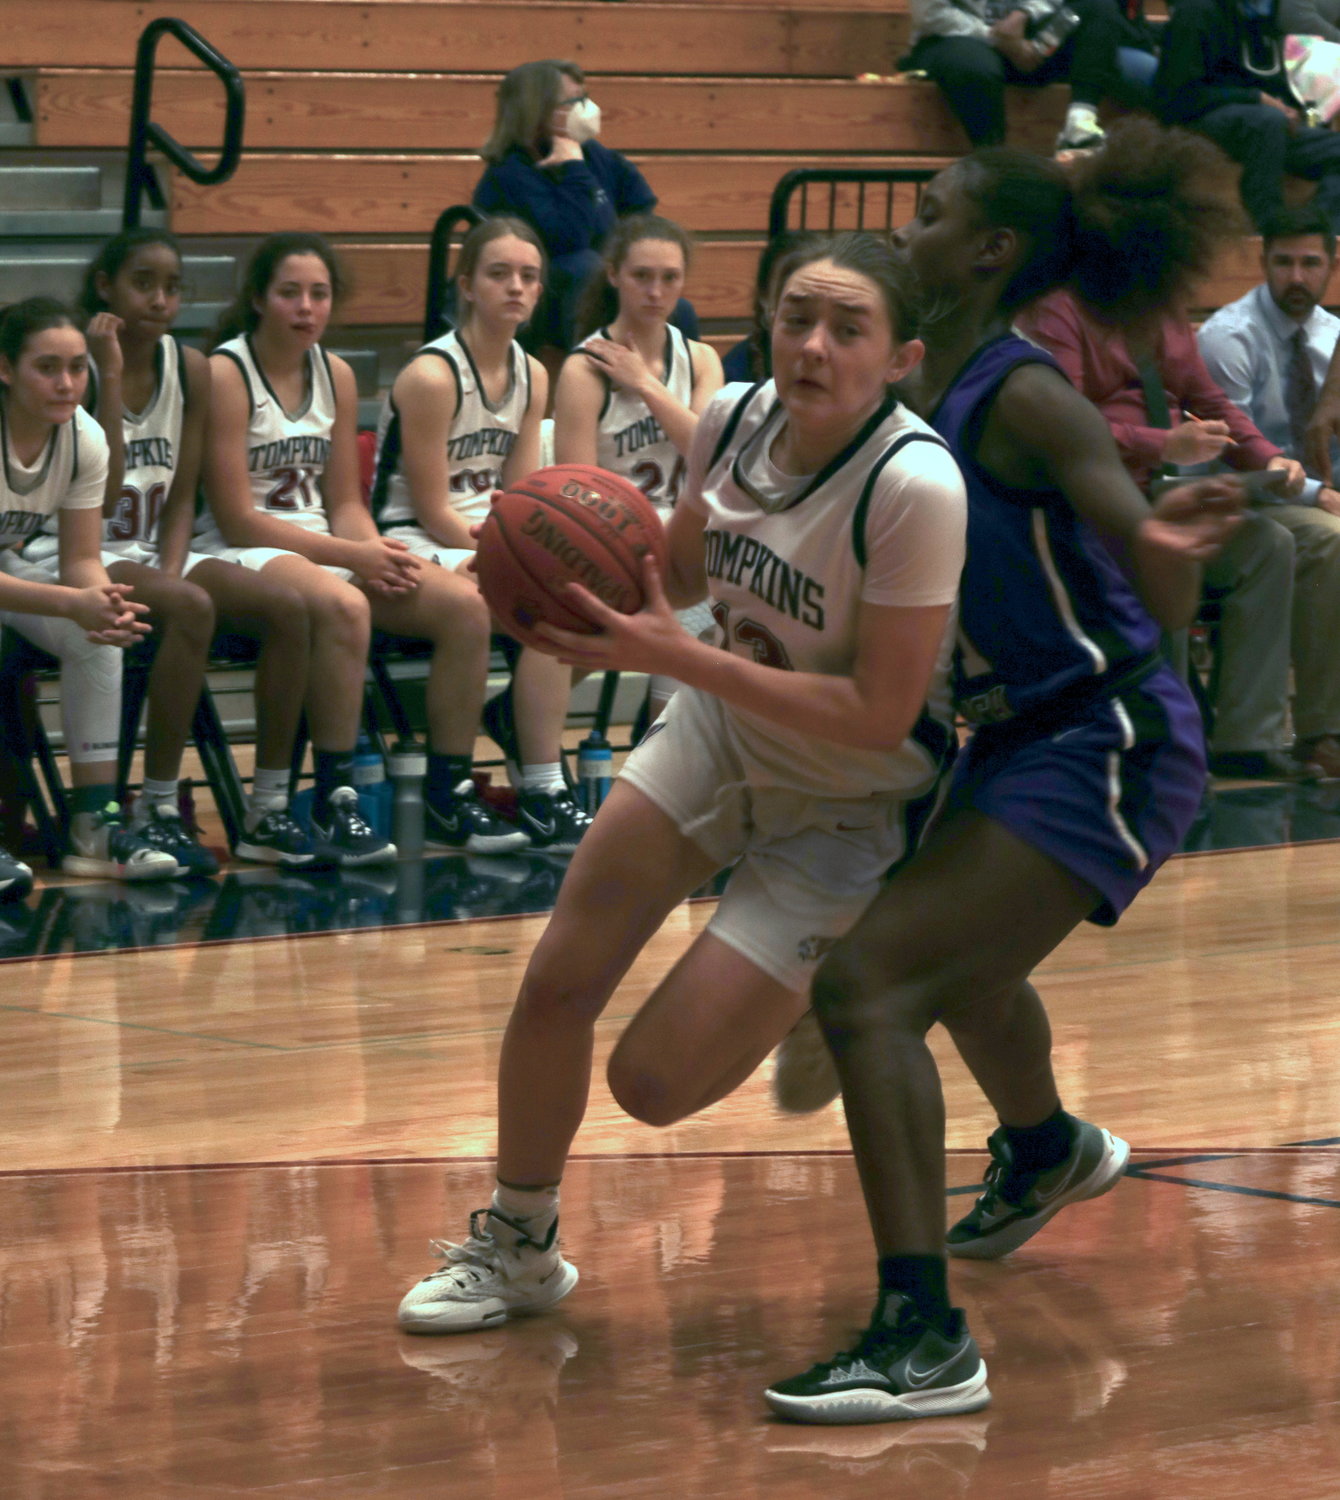 Tompkins Macy Spencer drives to the basket during Friday’s game against Morton Ranch at the Tompkins gym